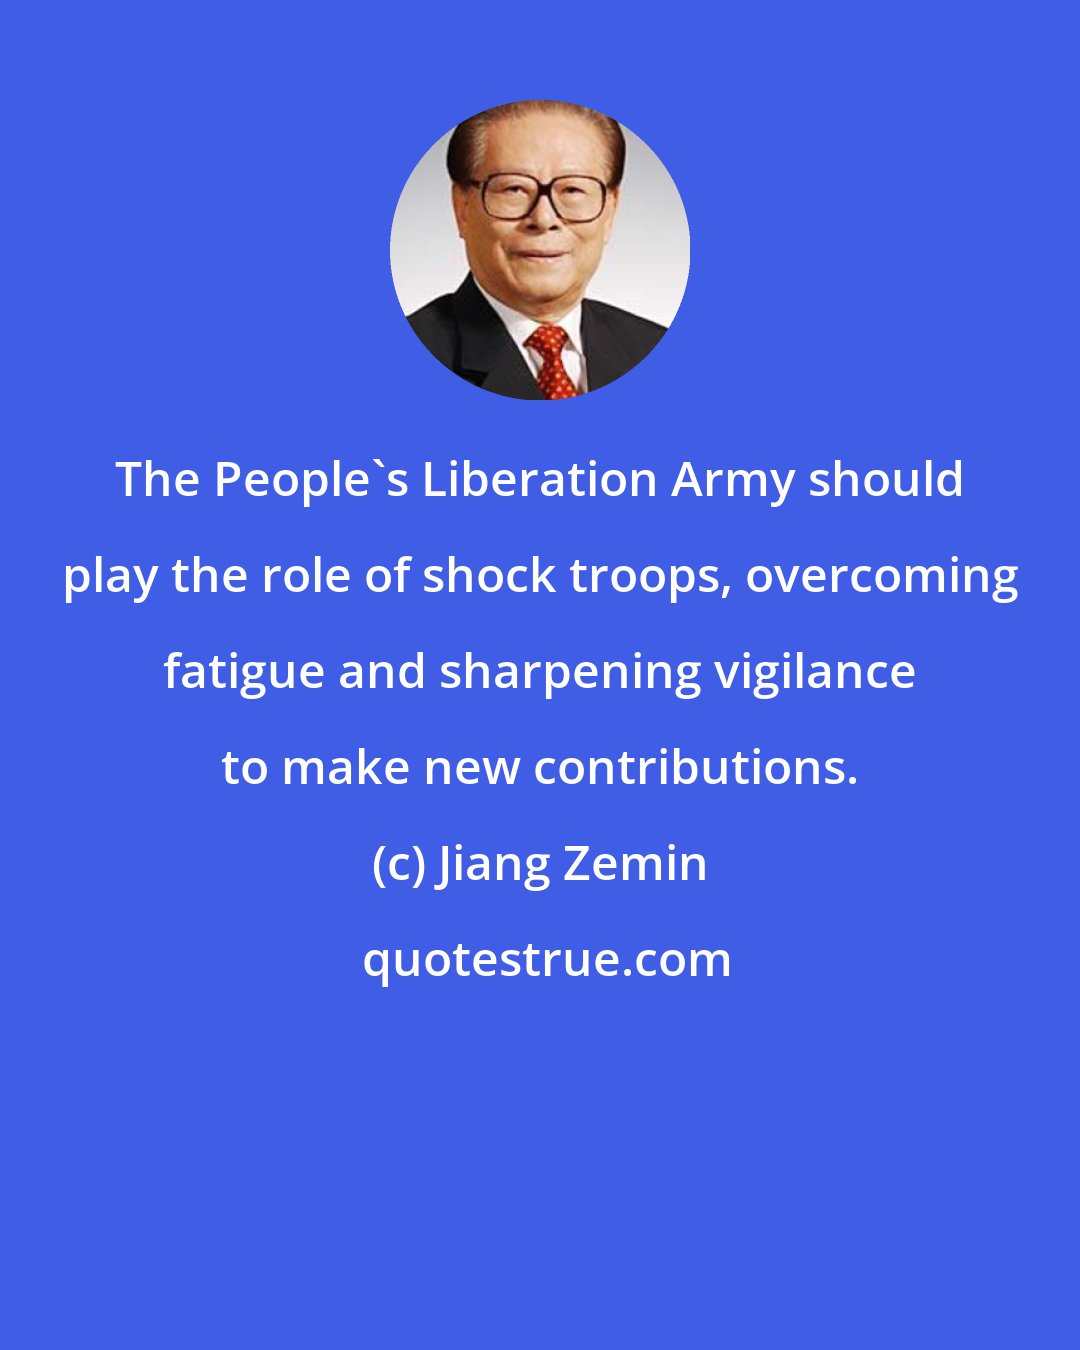 Jiang Zemin: The People's Liberation Army should play the role of shock troops, overcoming fatigue and sharpening vigilance to make new contributions.